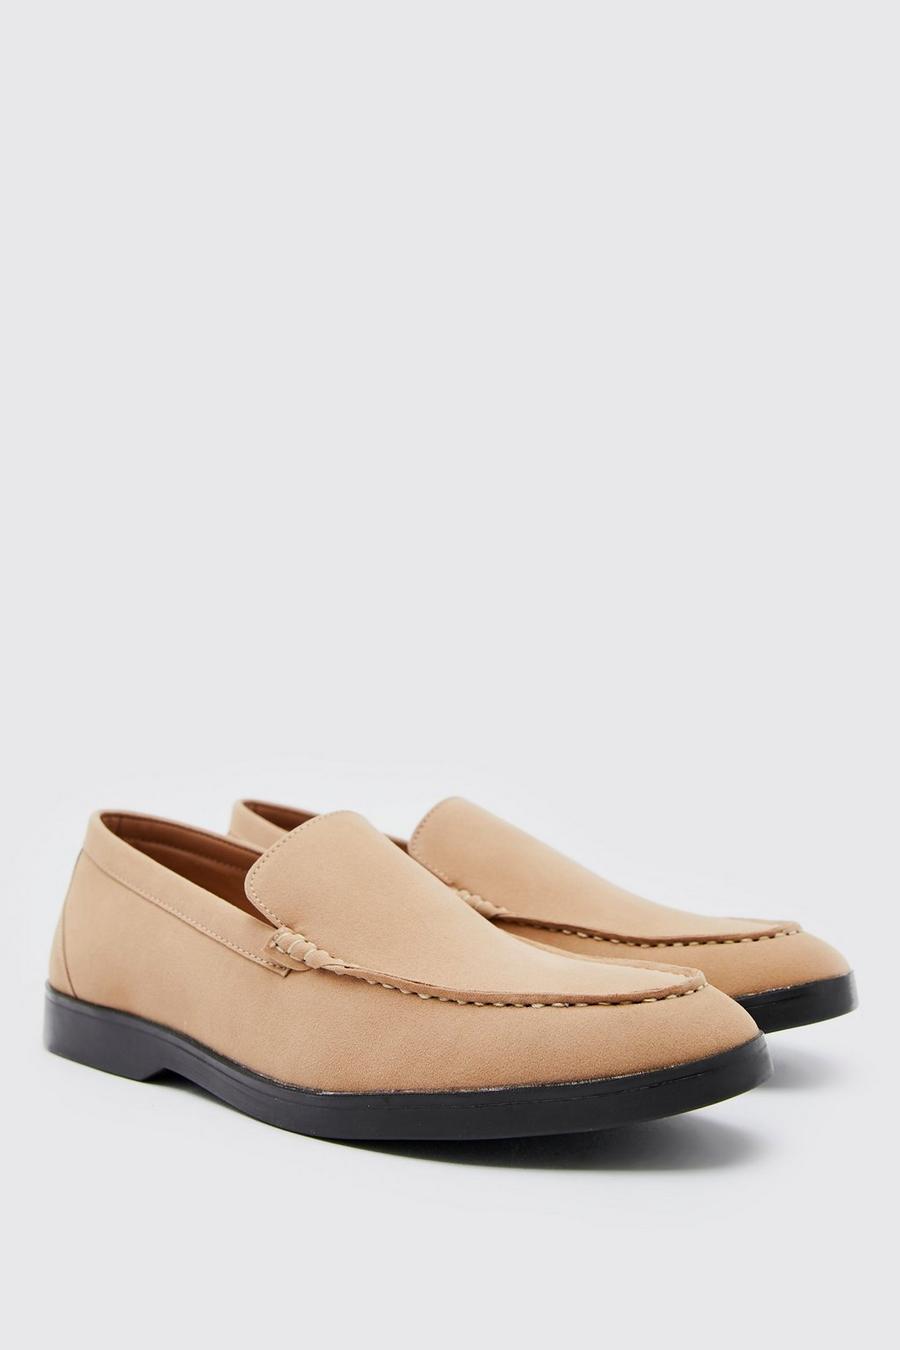 Stone beis Faux Suede Slip On Loafer